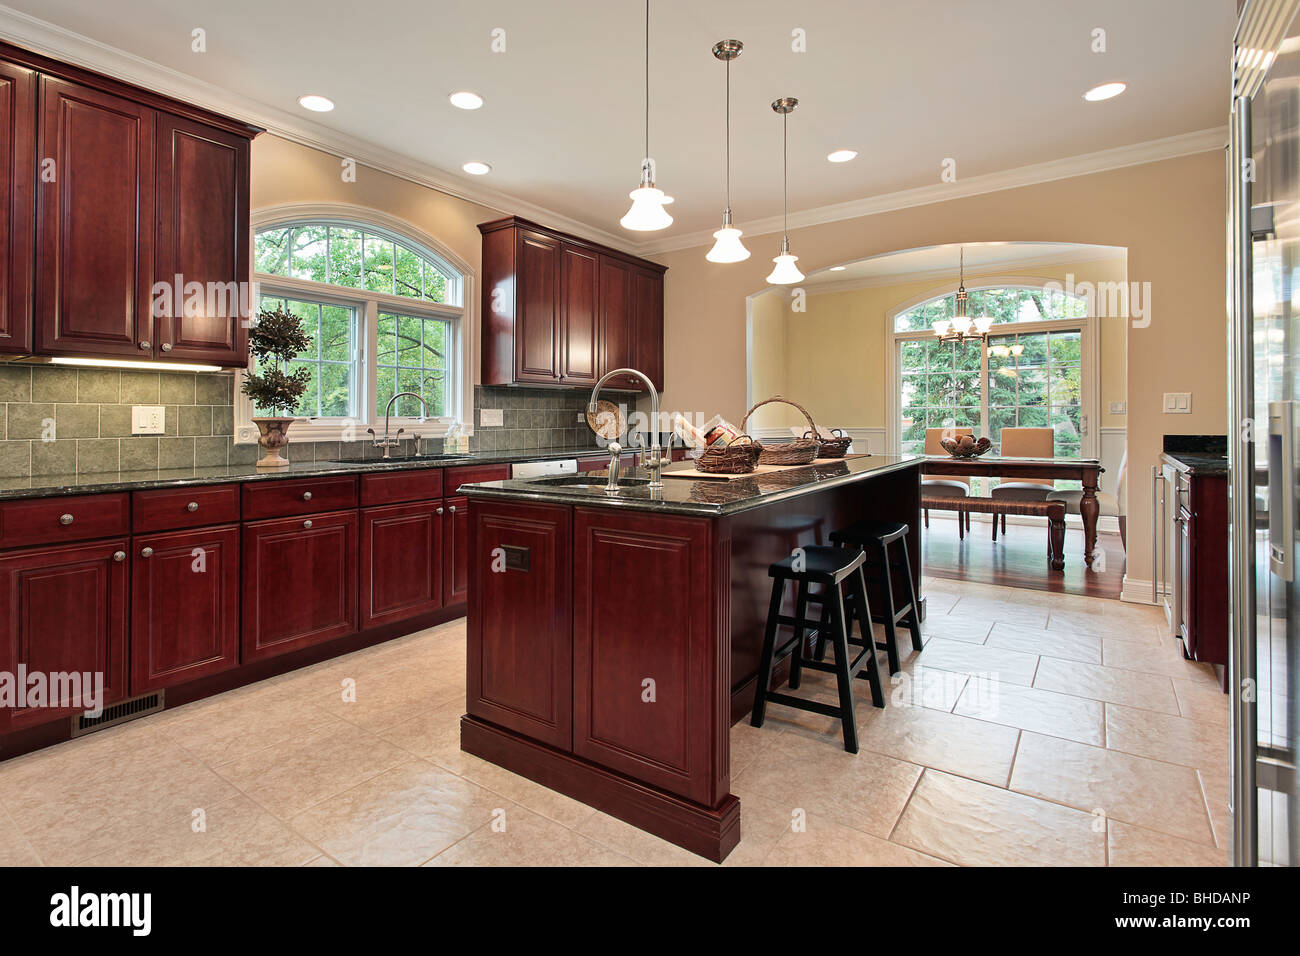 Kitchen In Luxury Home With Cherry Wood Cabinetry Stock Photo Alamy